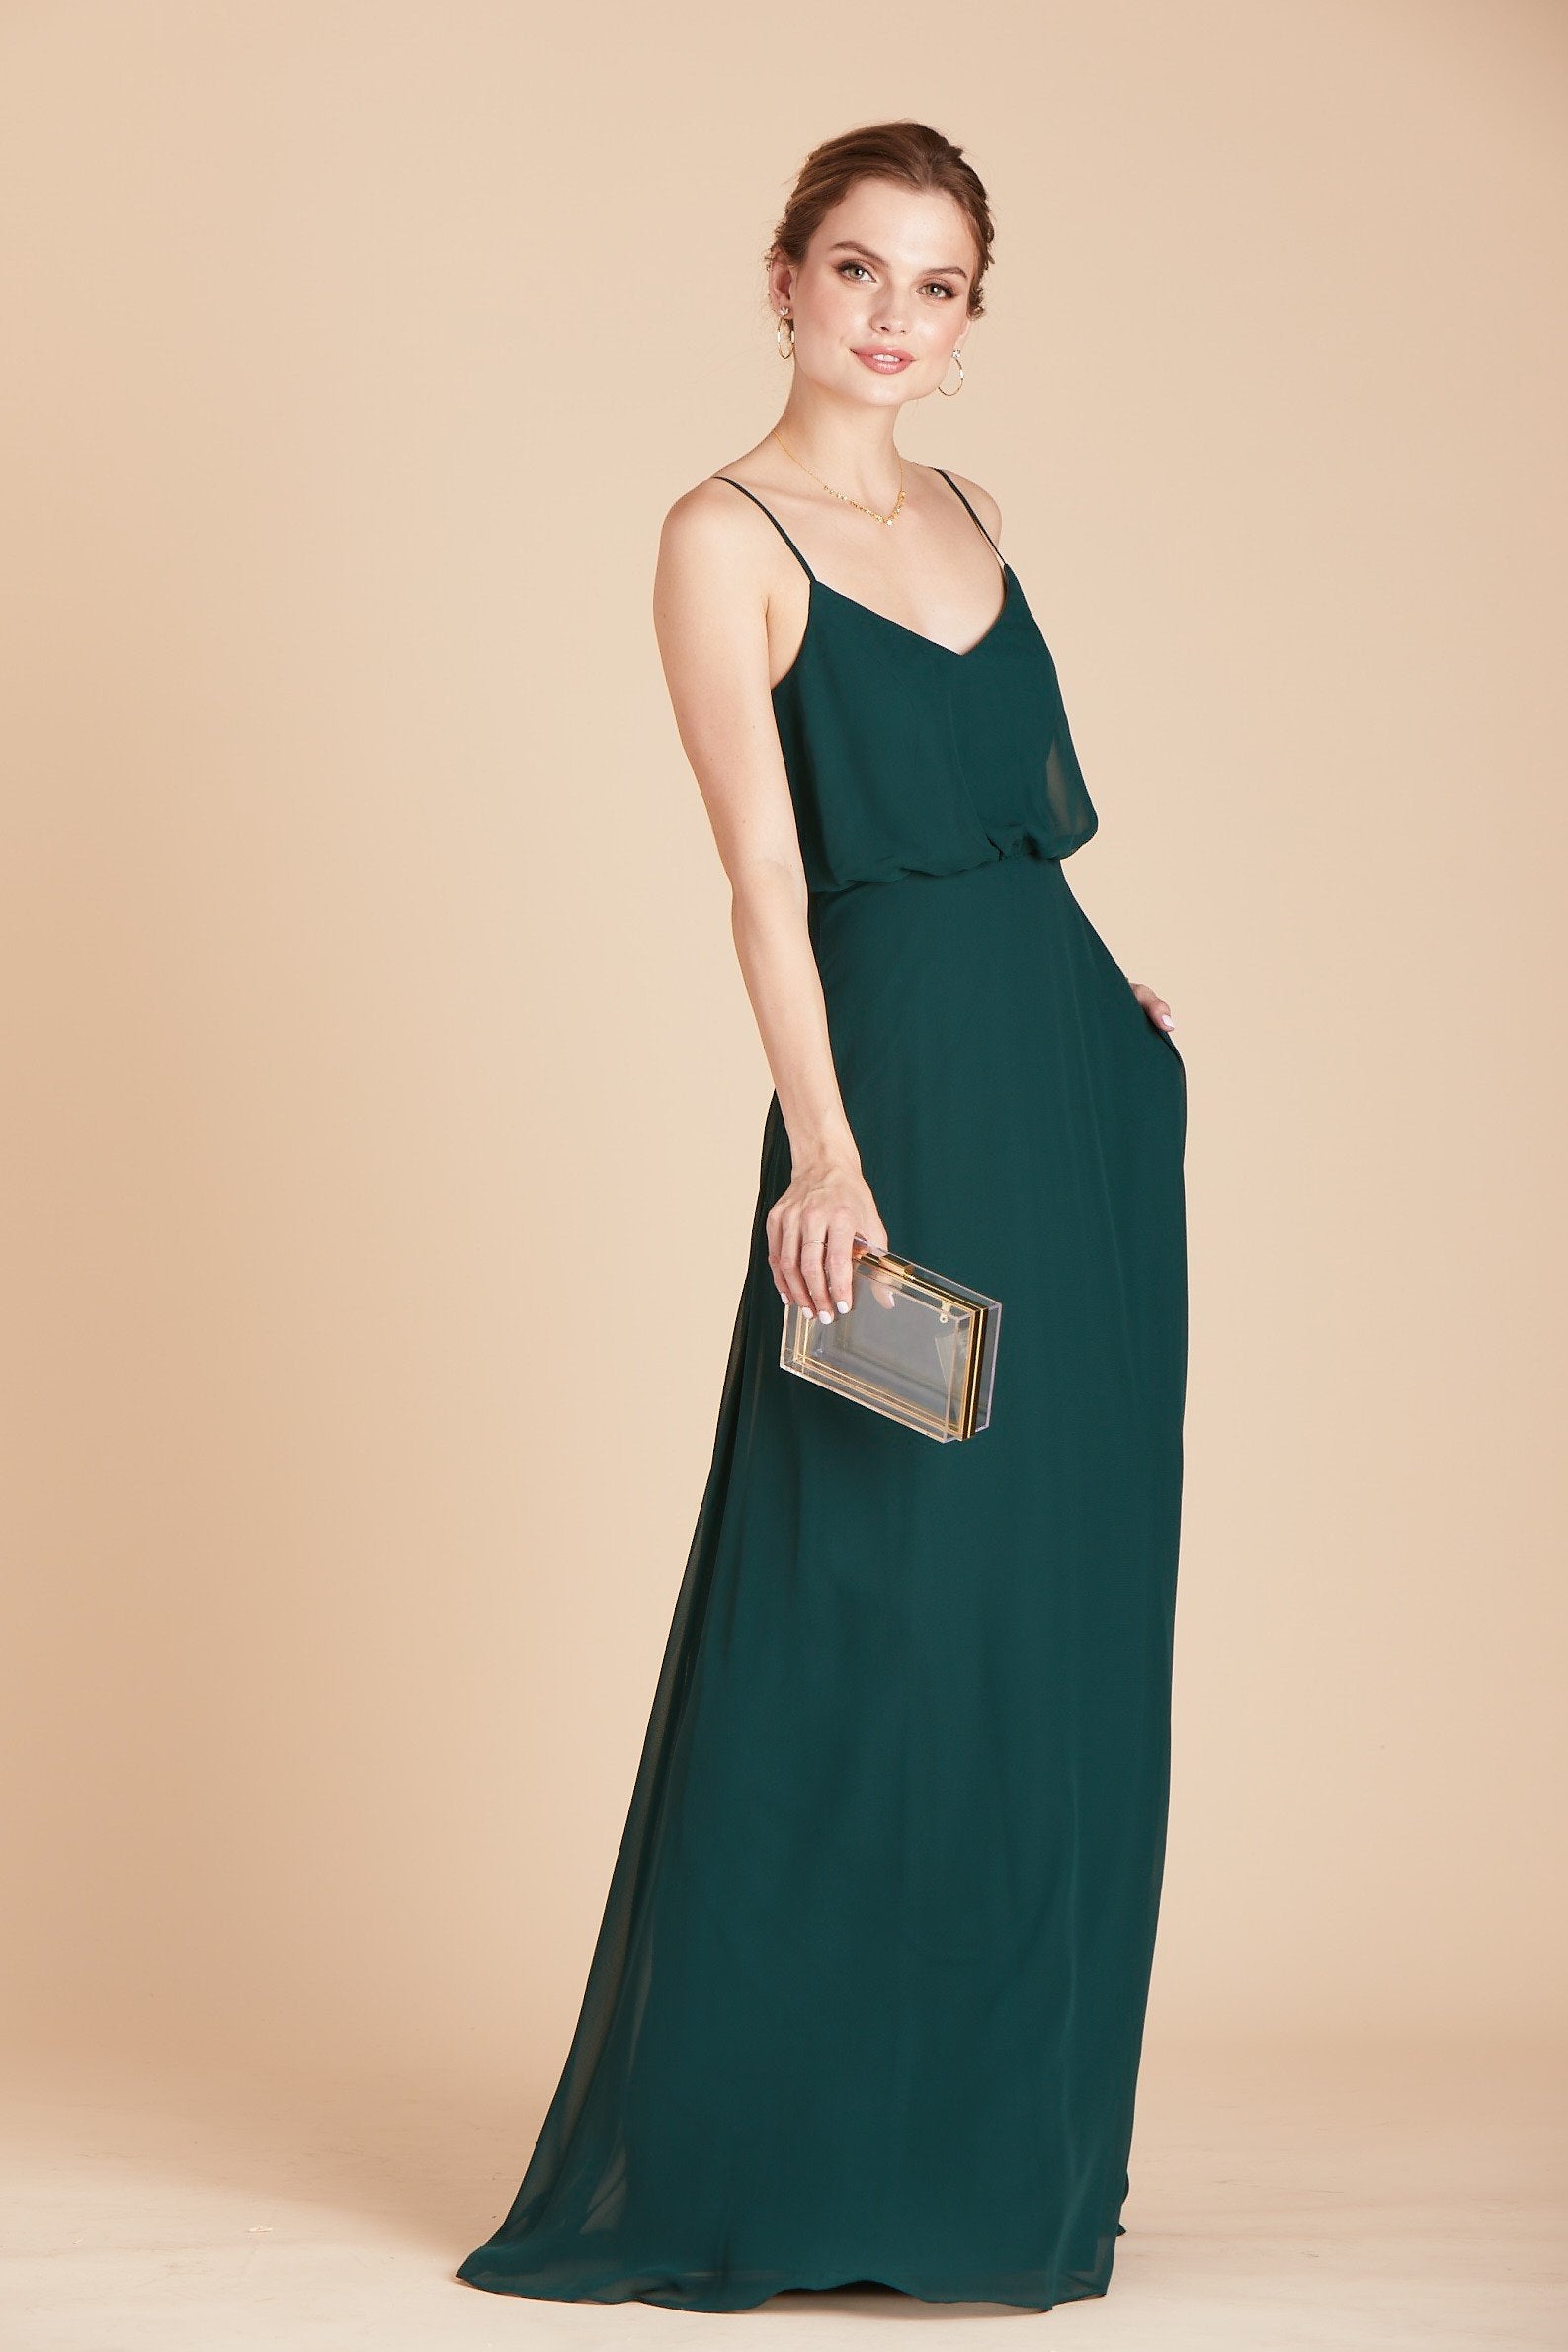 Gwennie bridesmaid dress in emerald green chiffon by Birdy Grey, front view with hand in pocket